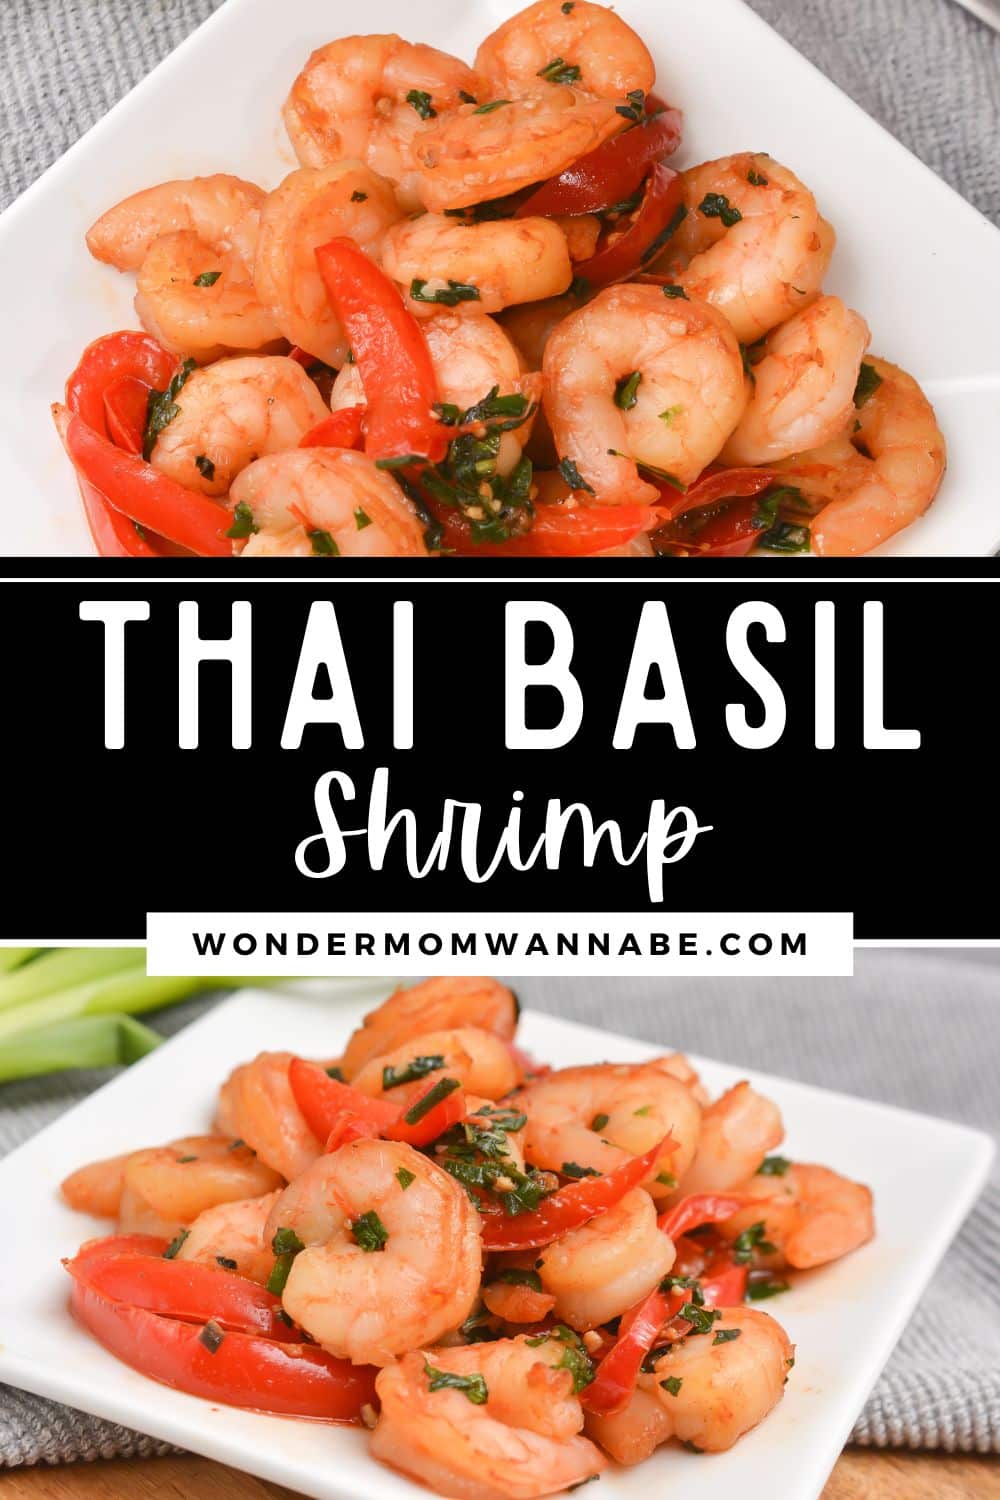 Thai basil shrimp, known for its aromatic Thai basil sauce, is presented on a simple white plate.